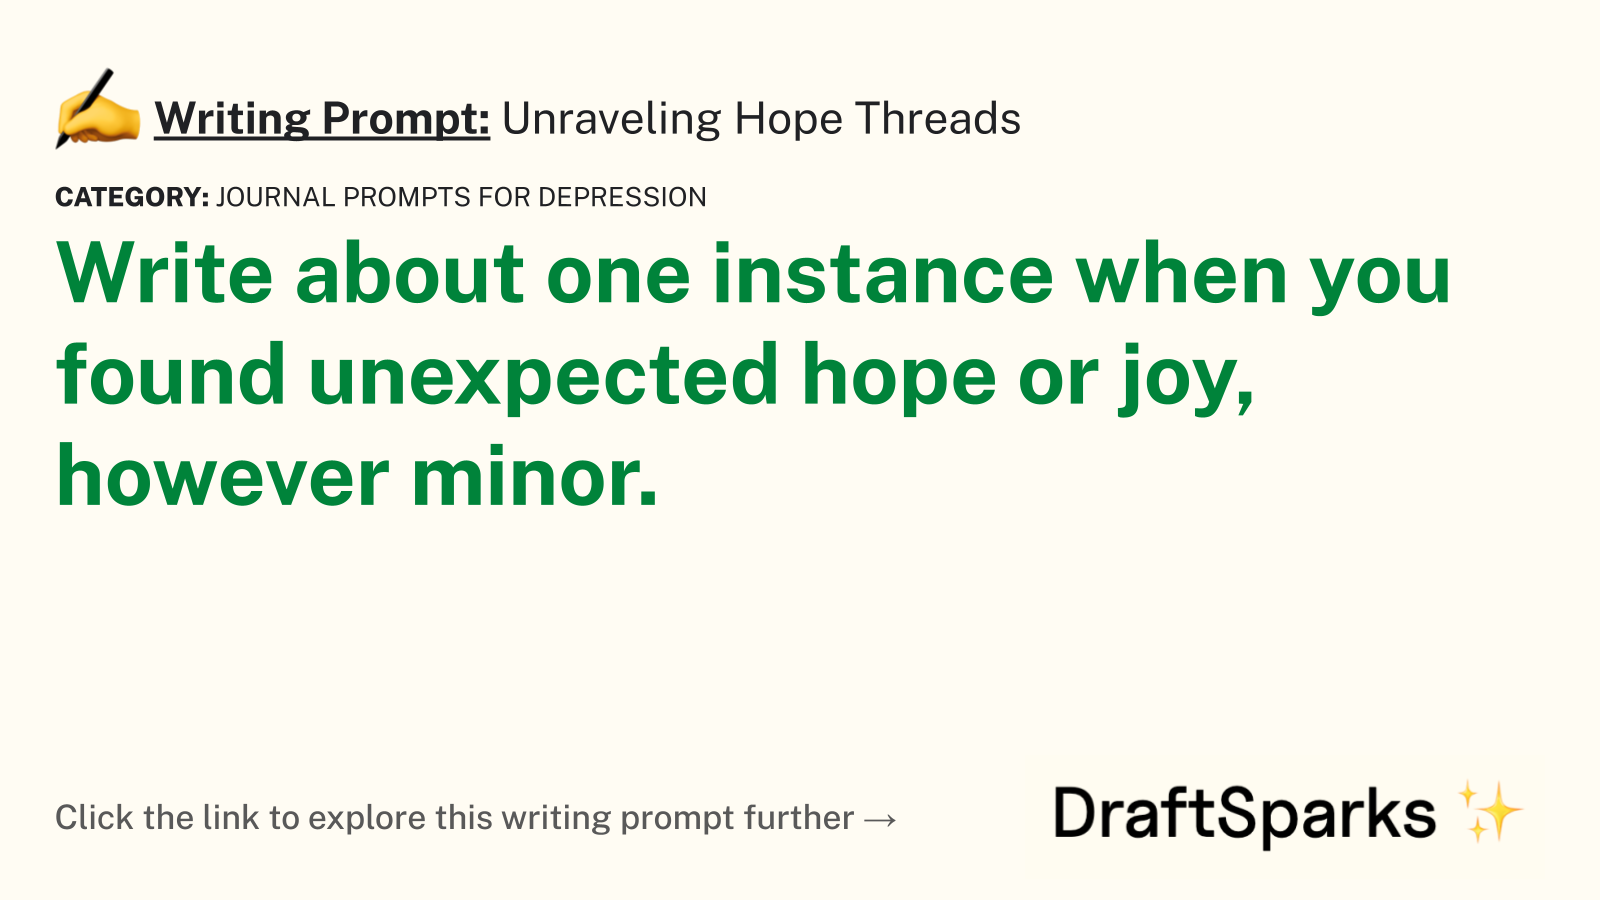 Unraveling Hope Threads